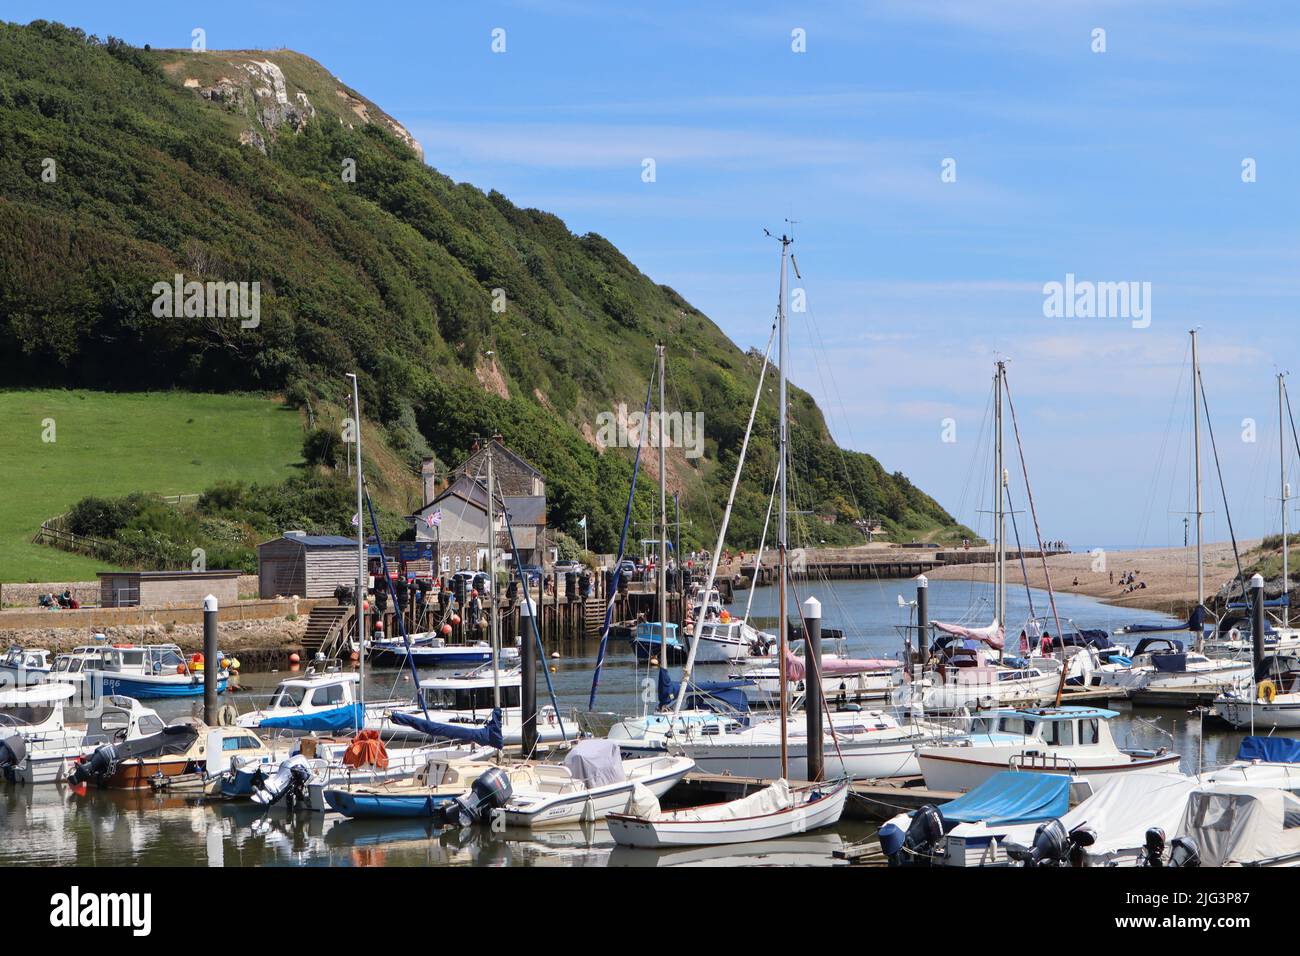 AXMOUTH, DEVON,ENGLAND - JULY 12TH 2020: Yachts and other boats in the marina at Axmouth on a beautiful sunny summers day Stock Photo